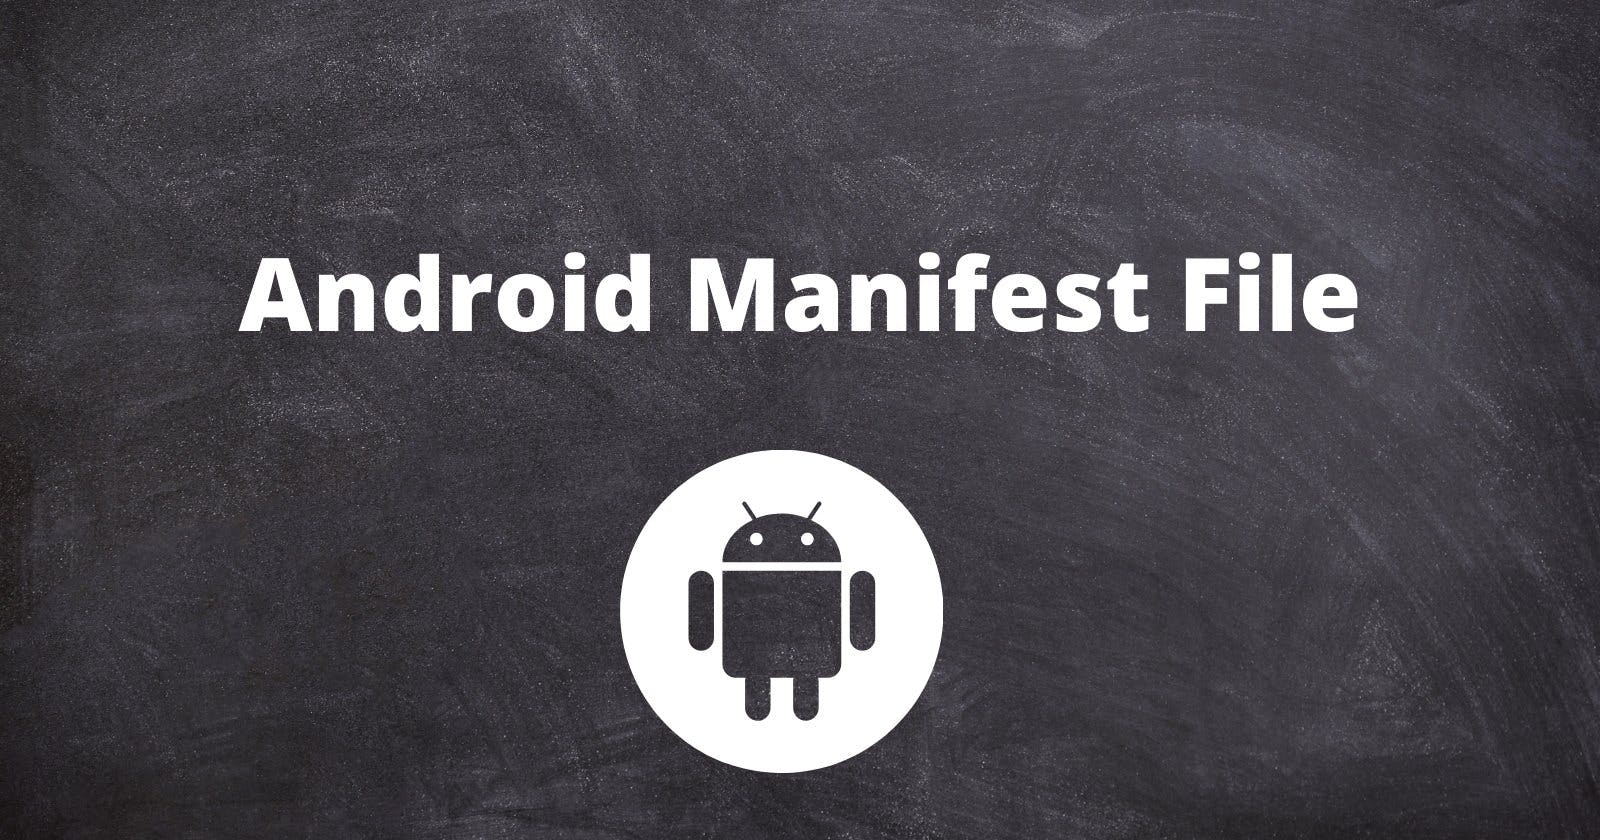 What is Android Manifest file?